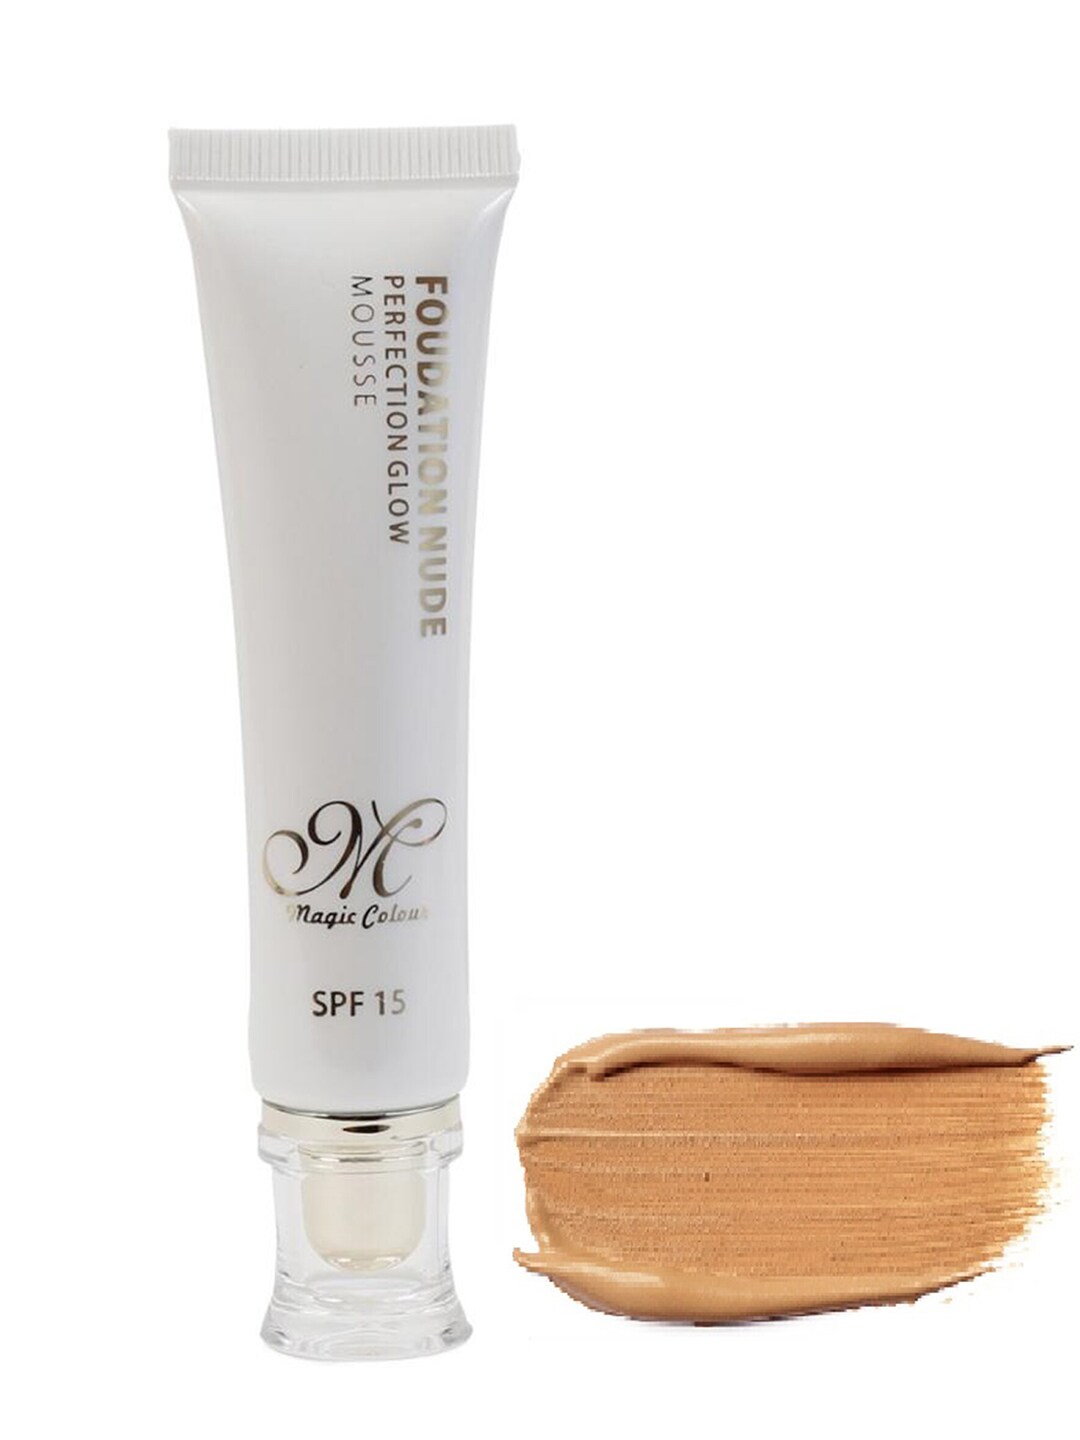 Magic Colour SPF 15 Perfection Glow Mousse Foundation 30 g - Beige 3 Price in India